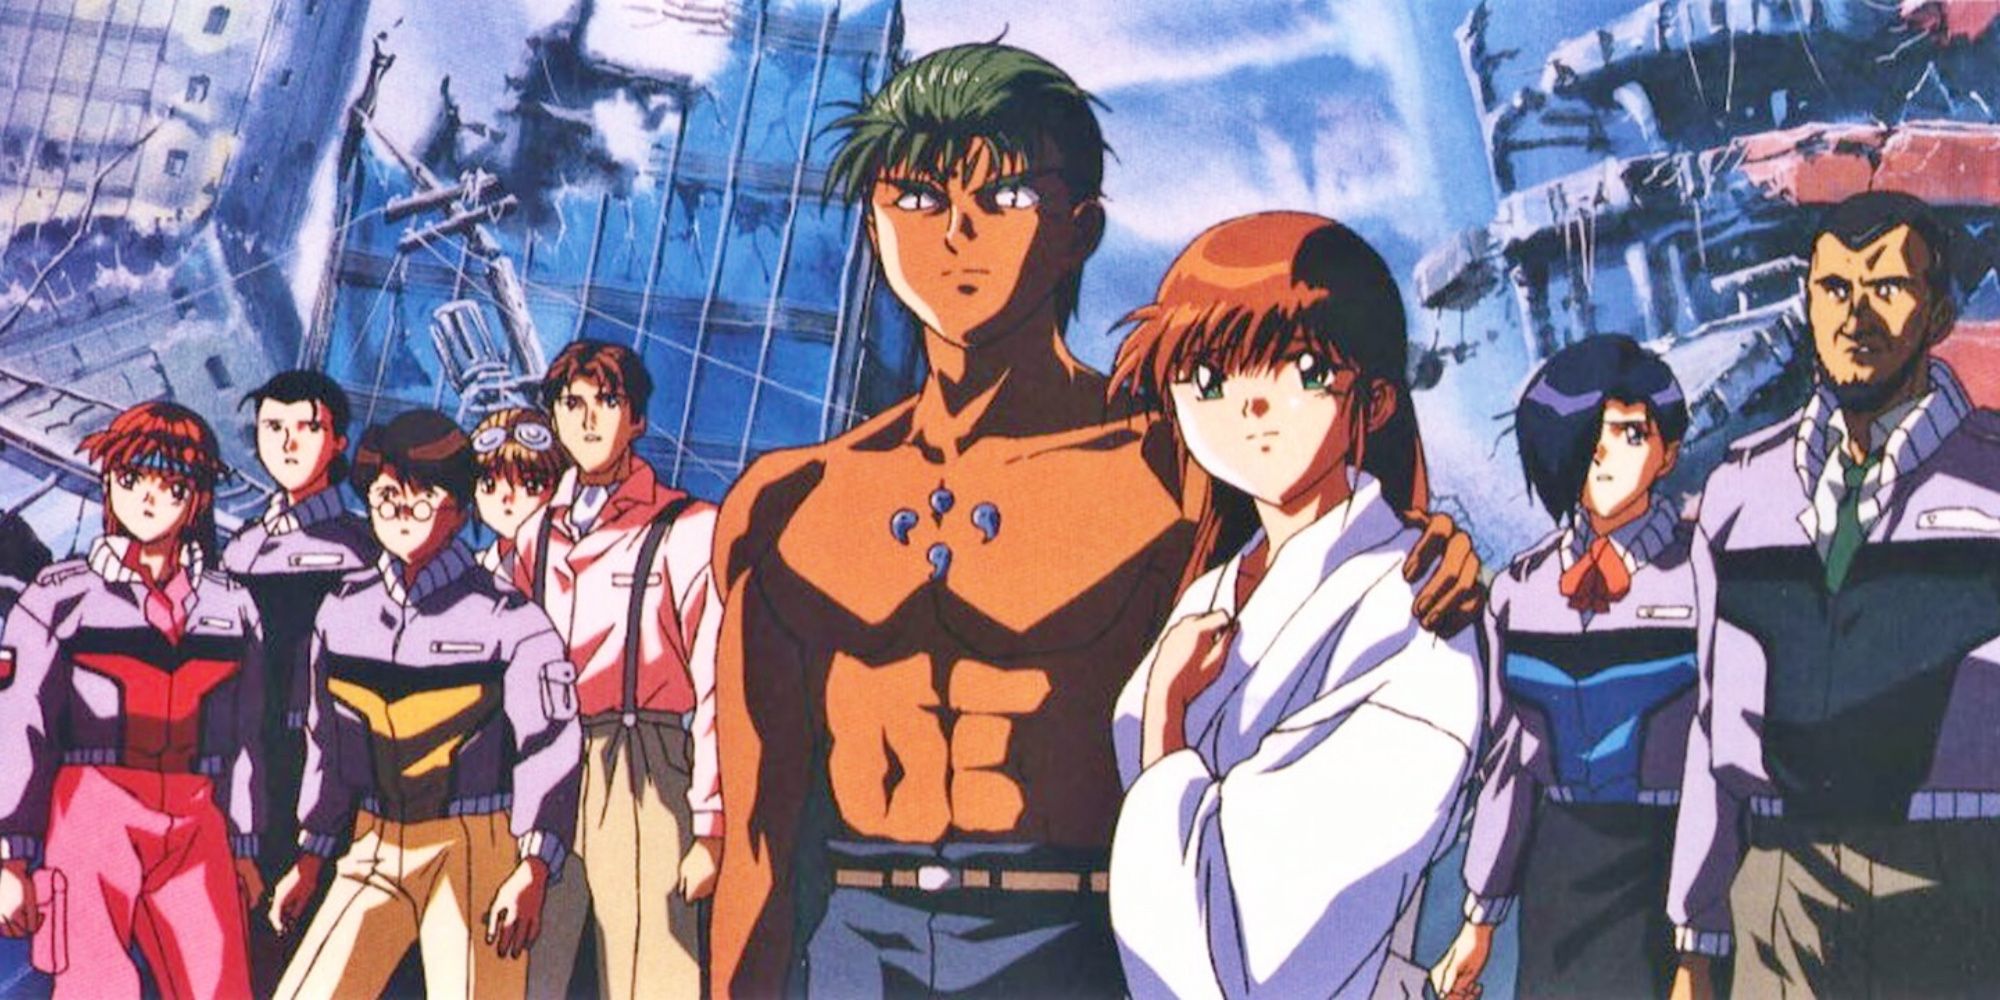 Promo art featuring characters in Blue Seed